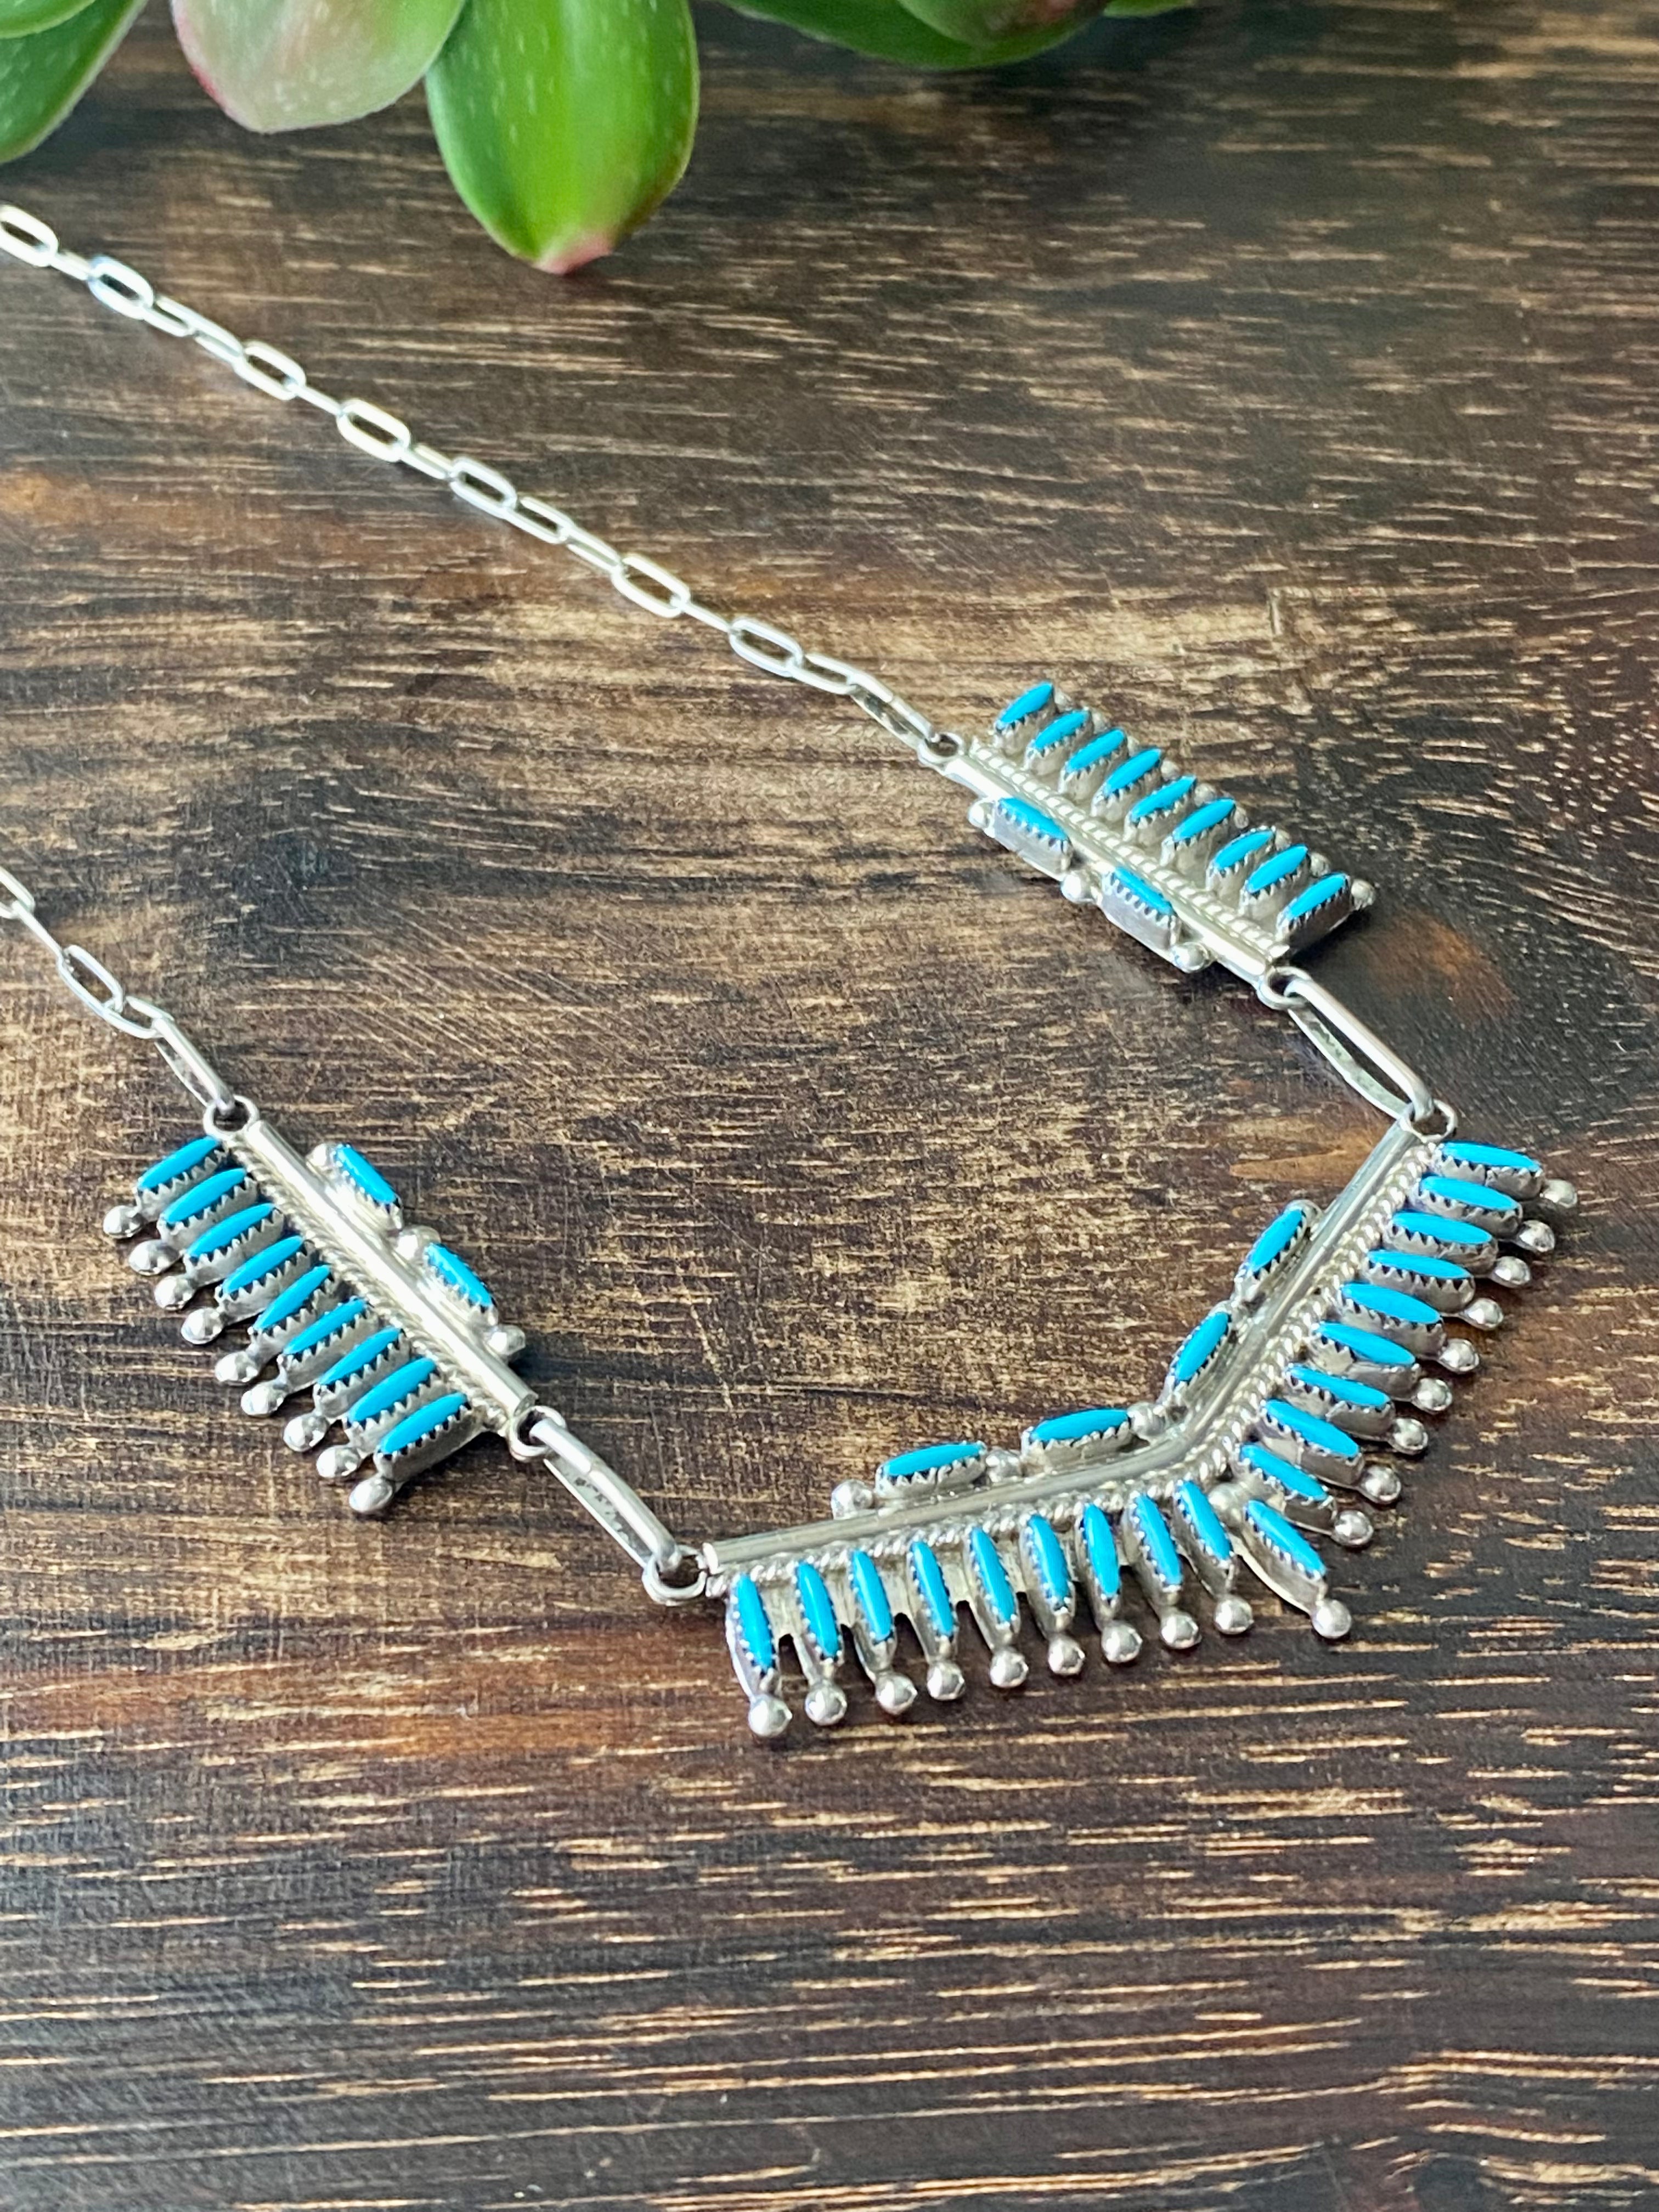 Zuni Made Turquoise & Sterling Silver Needlepoint Necklace Set